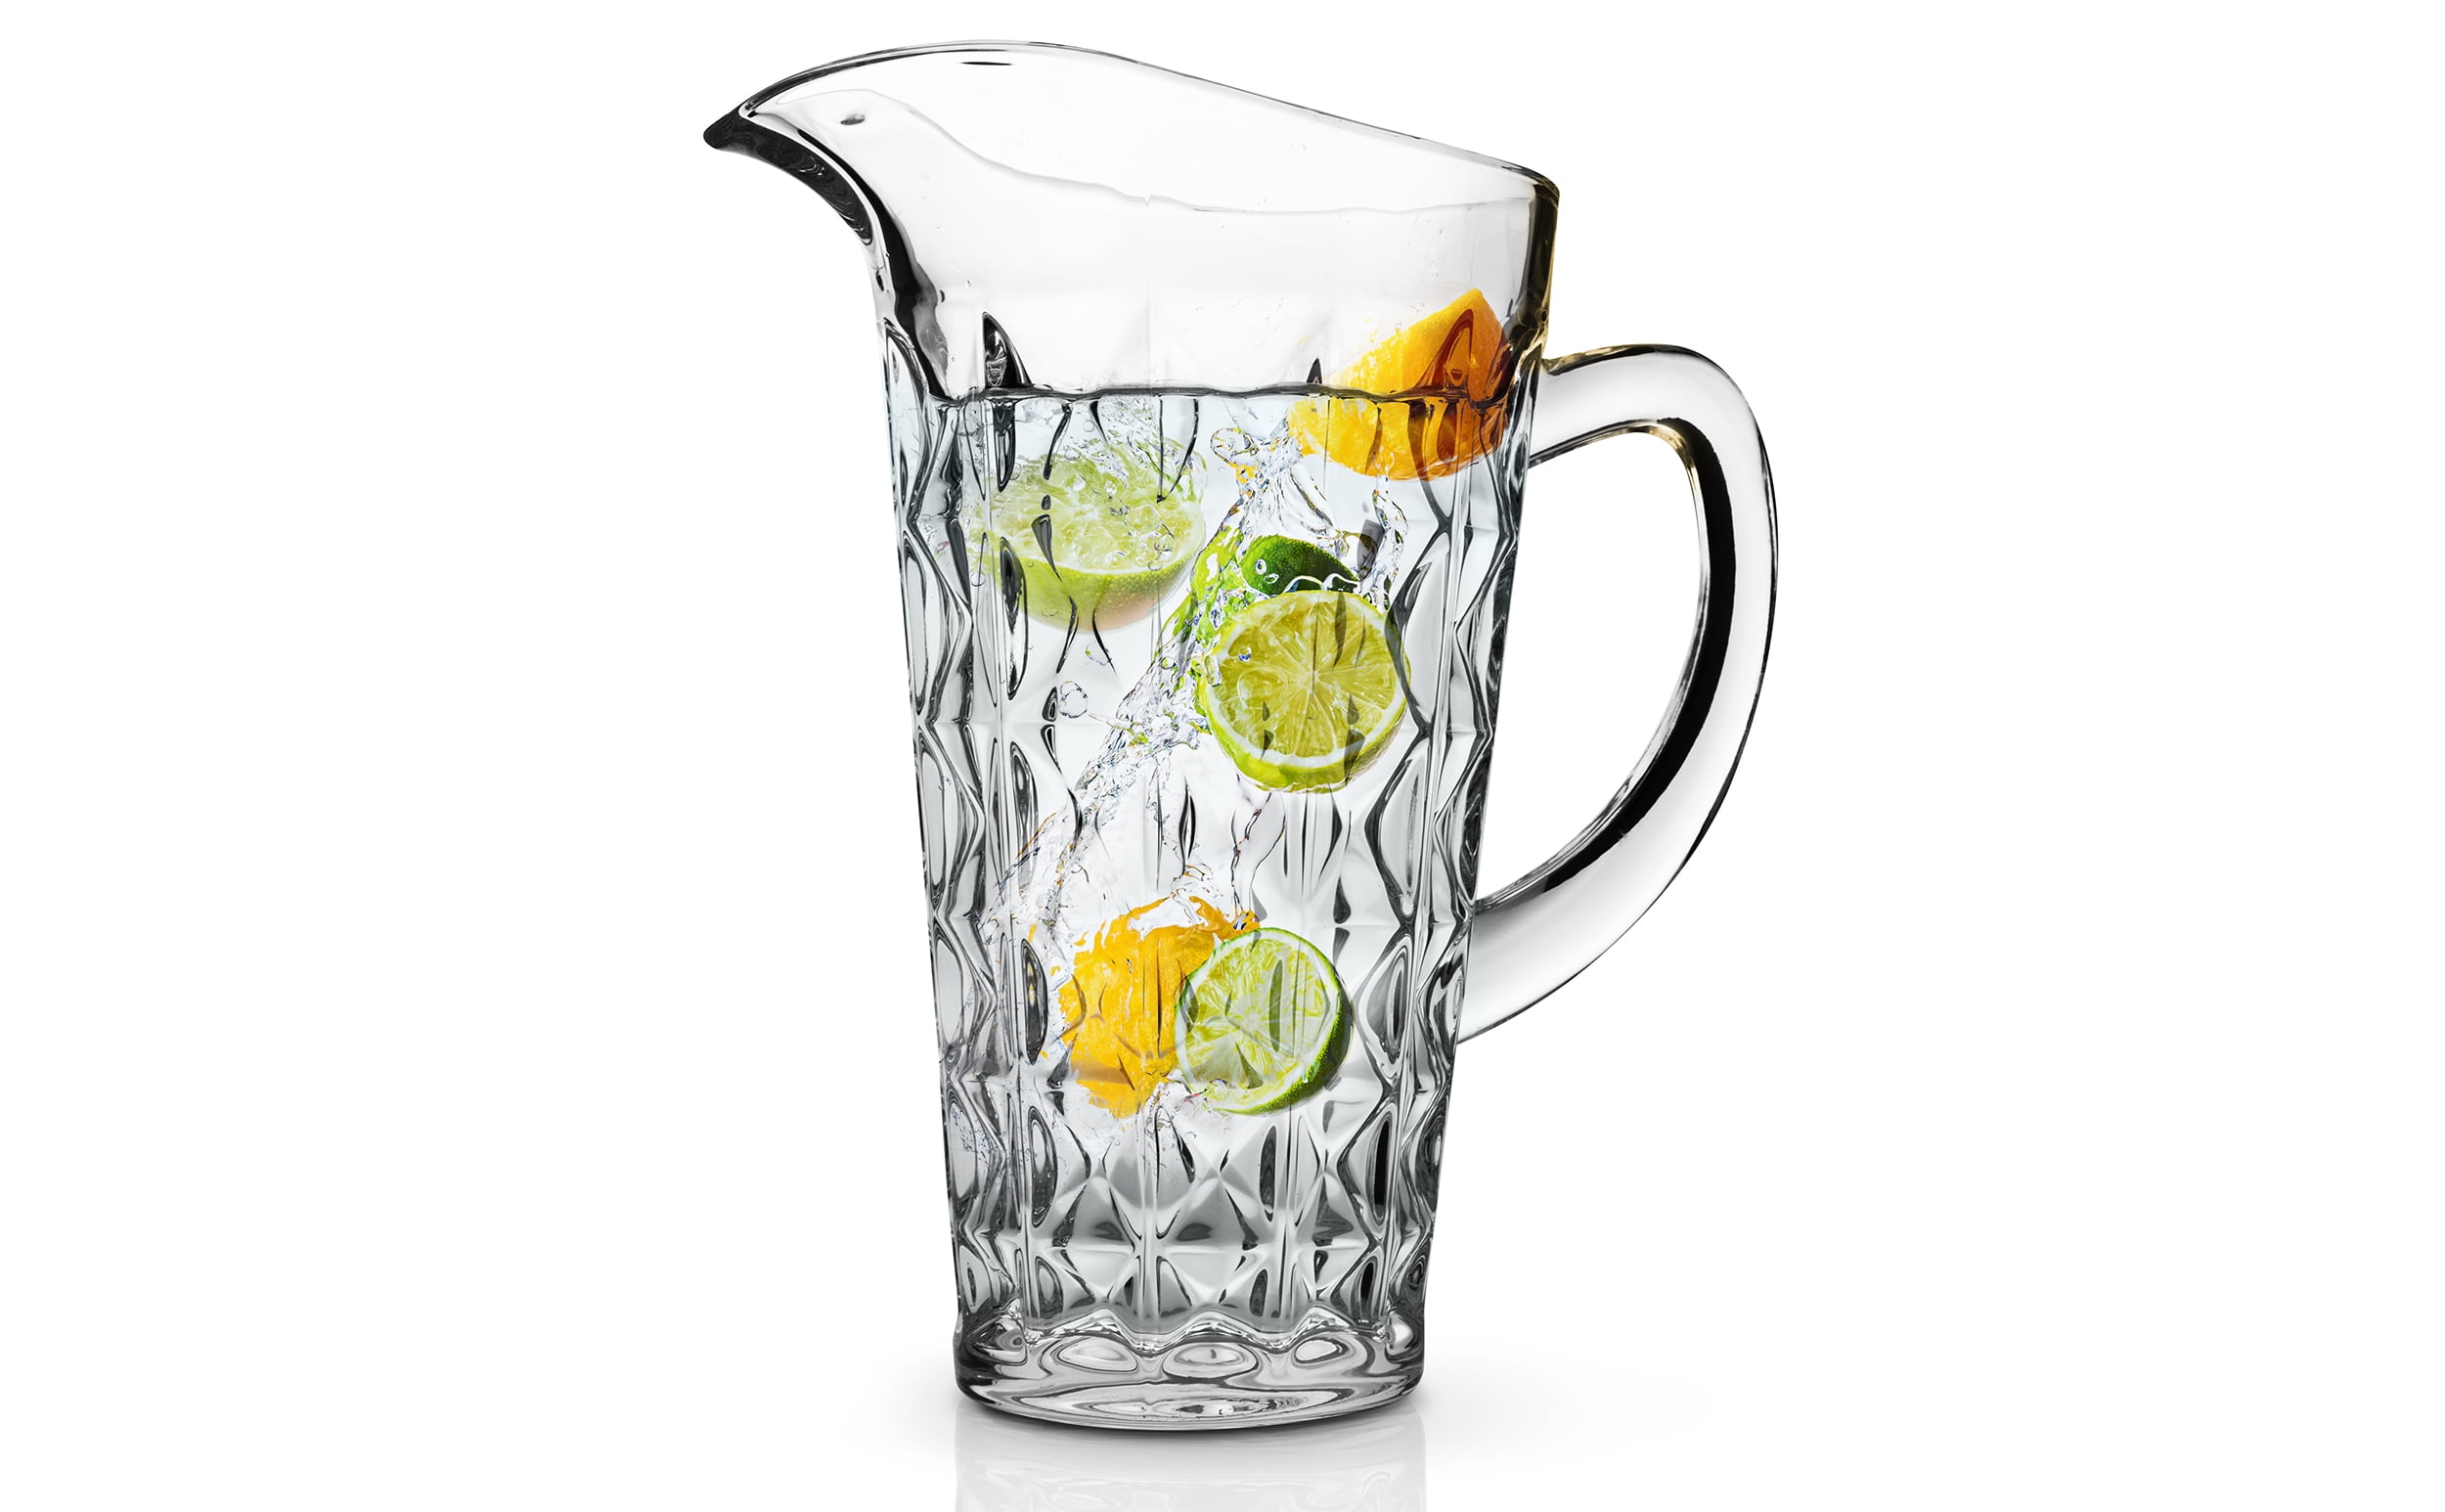 Water & Cold Drinks For Parties Brand New 48oz Clear Plastic Pitcher For Beer